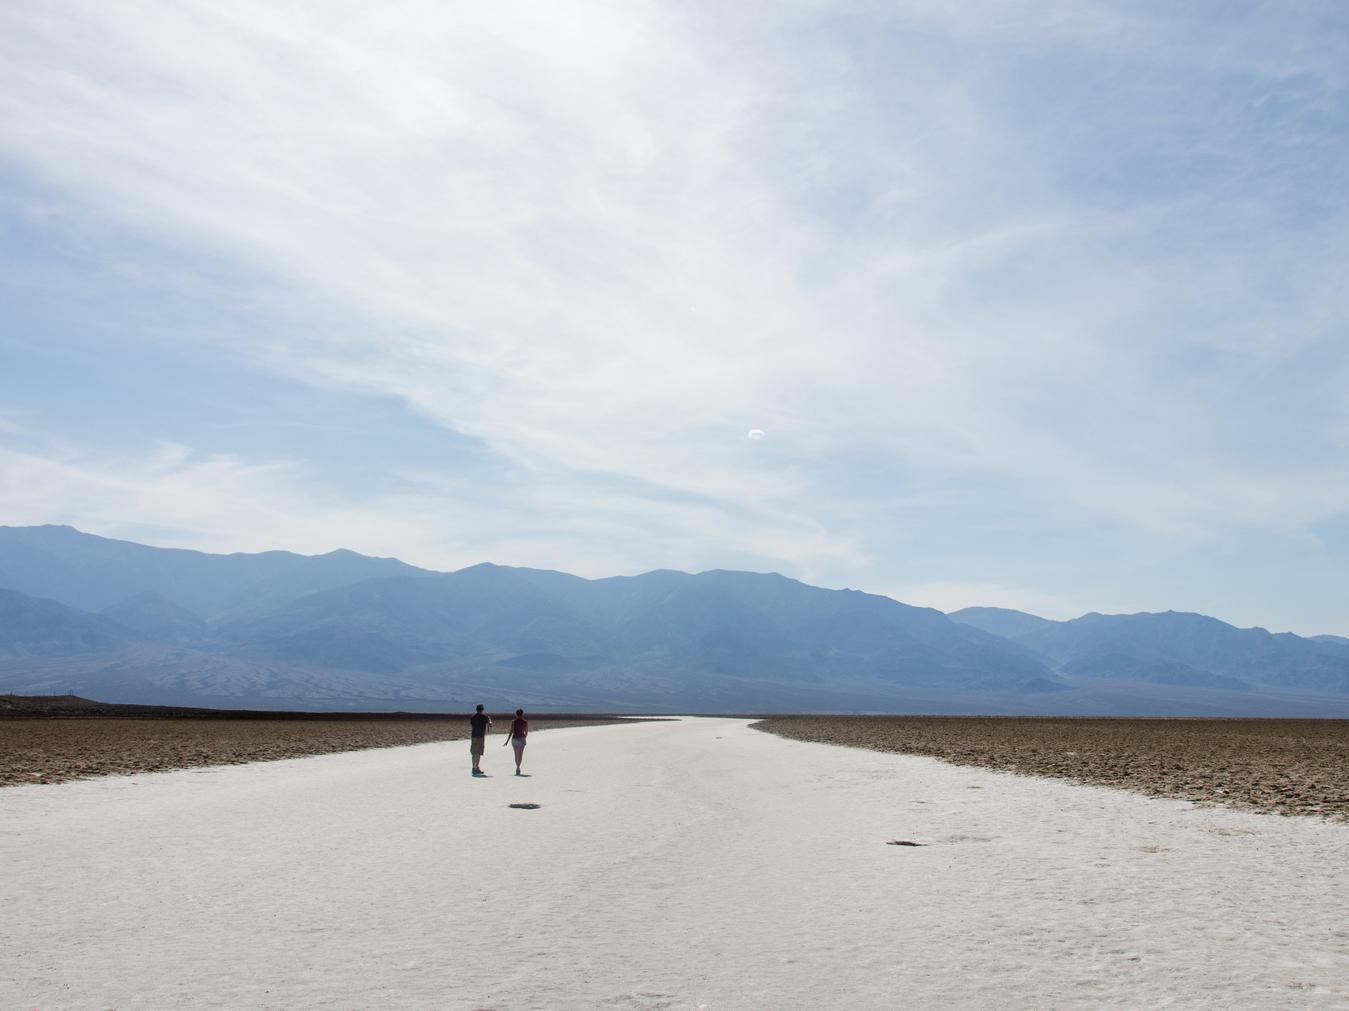 Death Valley has recorded the hottest average temperature in July two years running